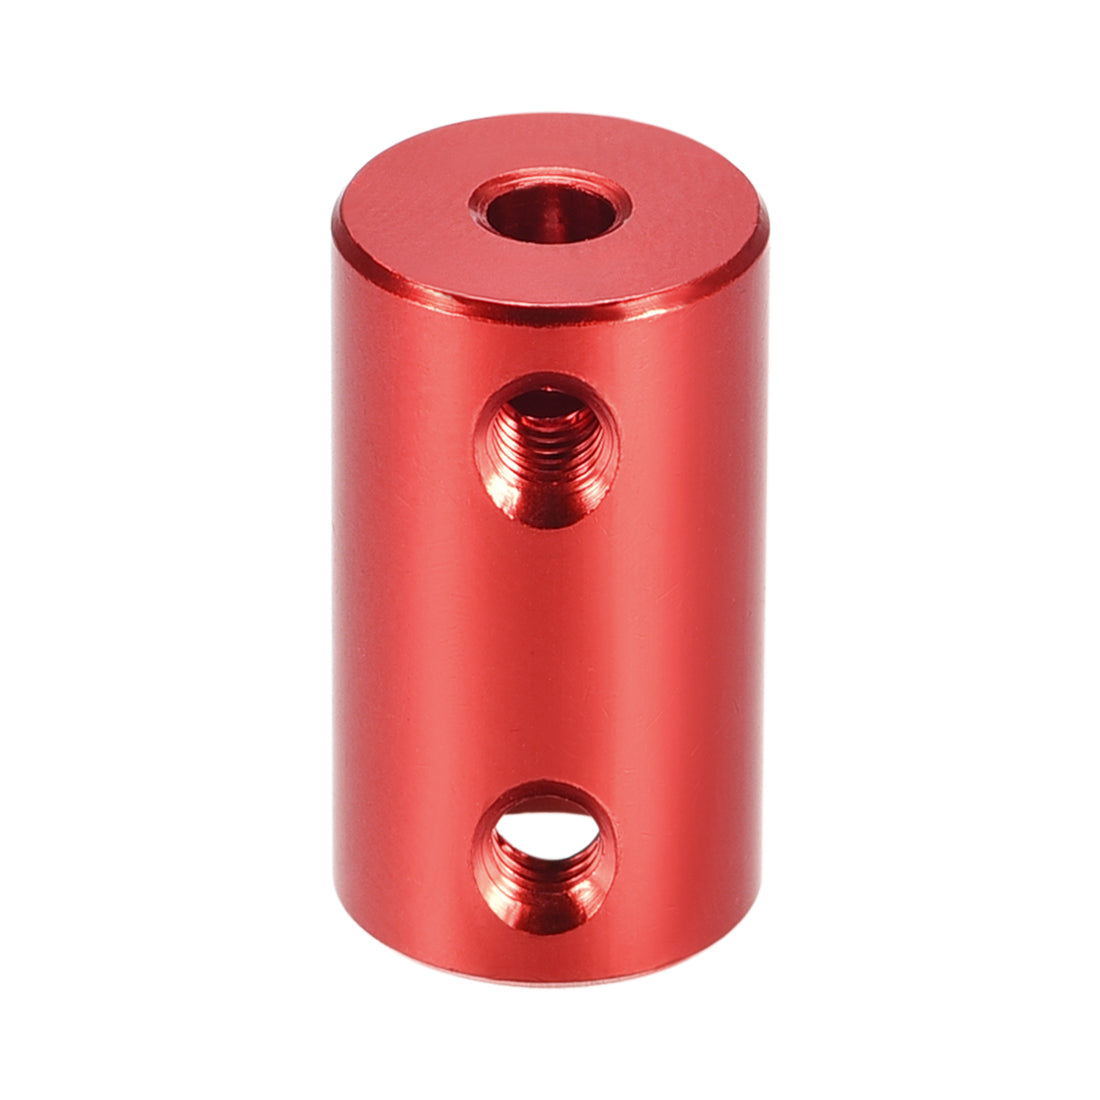 Uxcell Uxcell 3mm to 6mm Bore Rigid Coupling 25mm Length 14mm Diameter Aluminum Alloy Shaft Coupler Connector Red